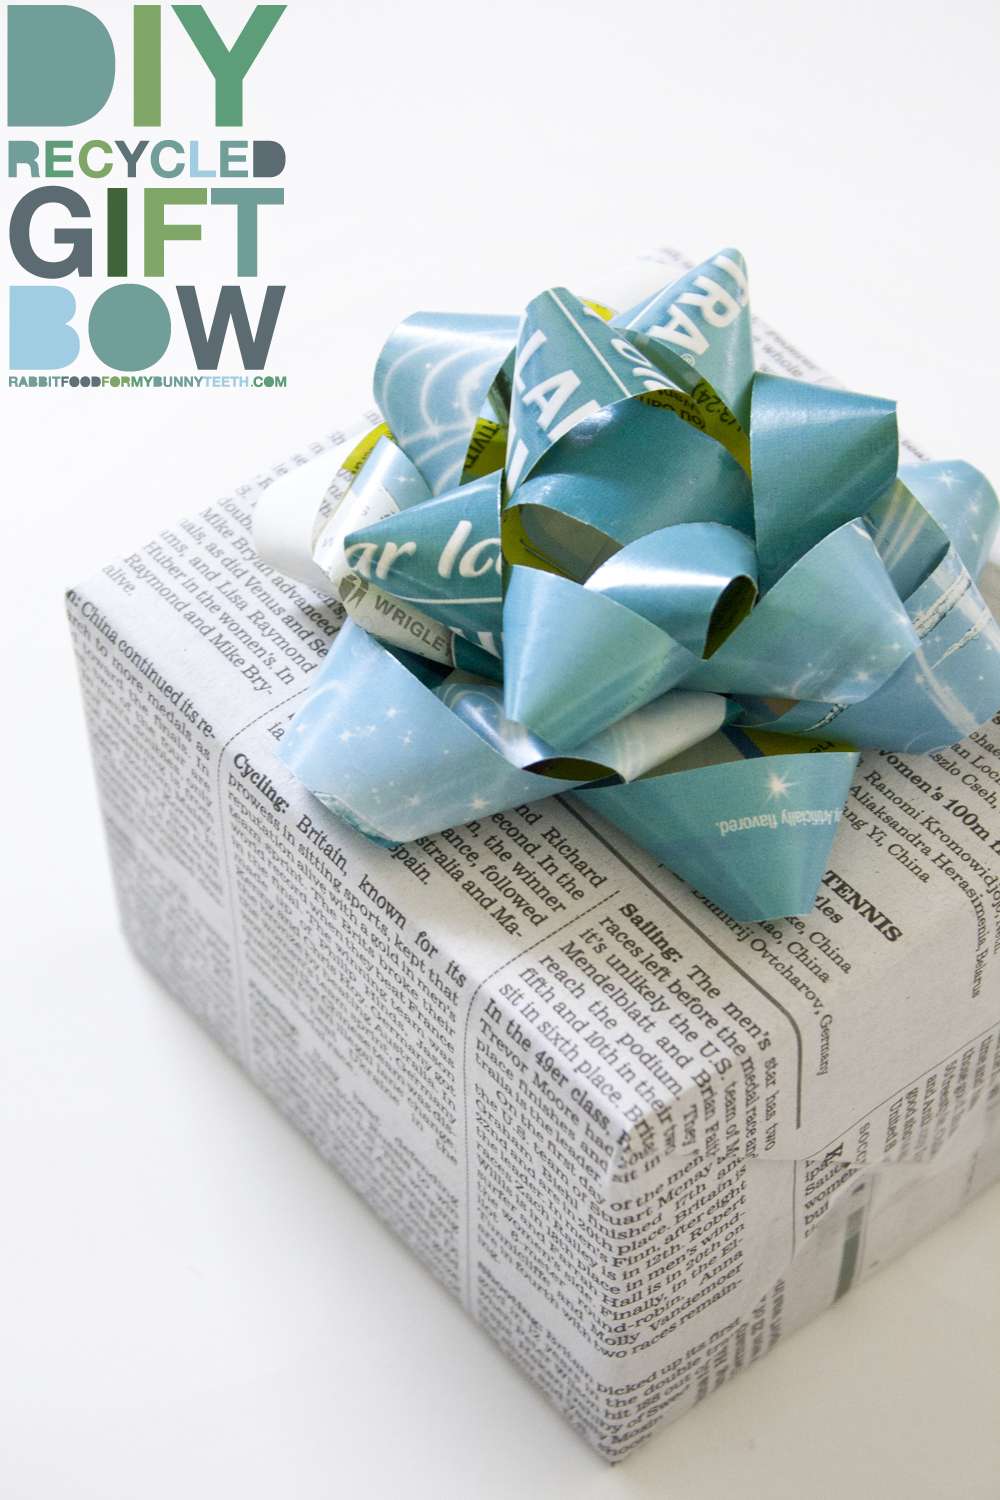 DIY Recycled Gift Bow